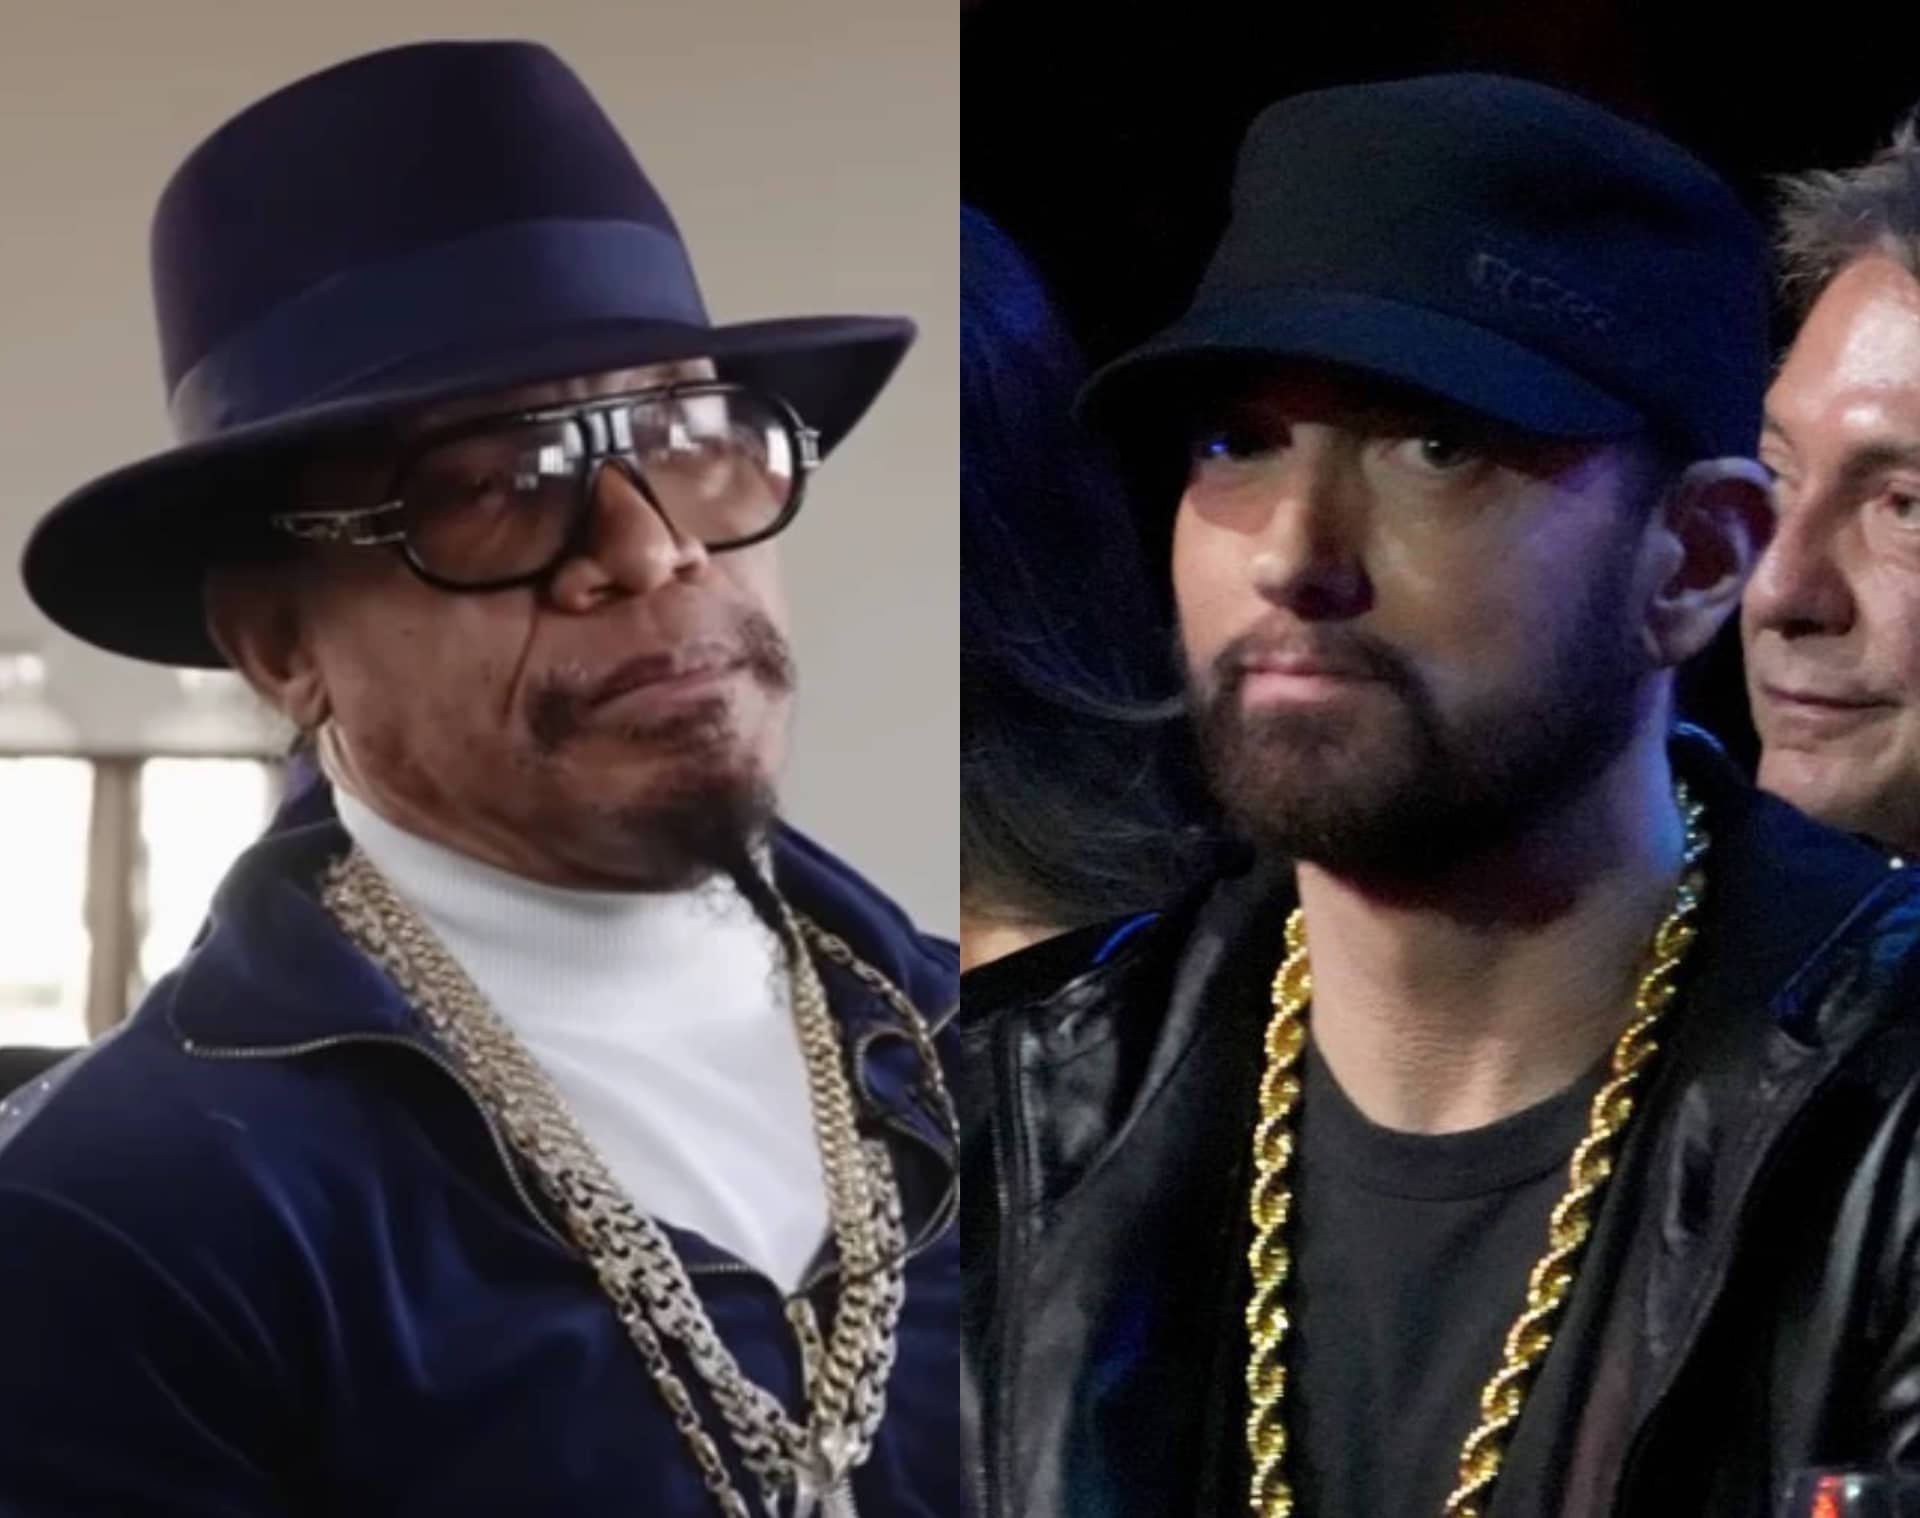 Melle Mel Issues Apology For Eminem Diss: "My Perspective Was ill-Conceived"